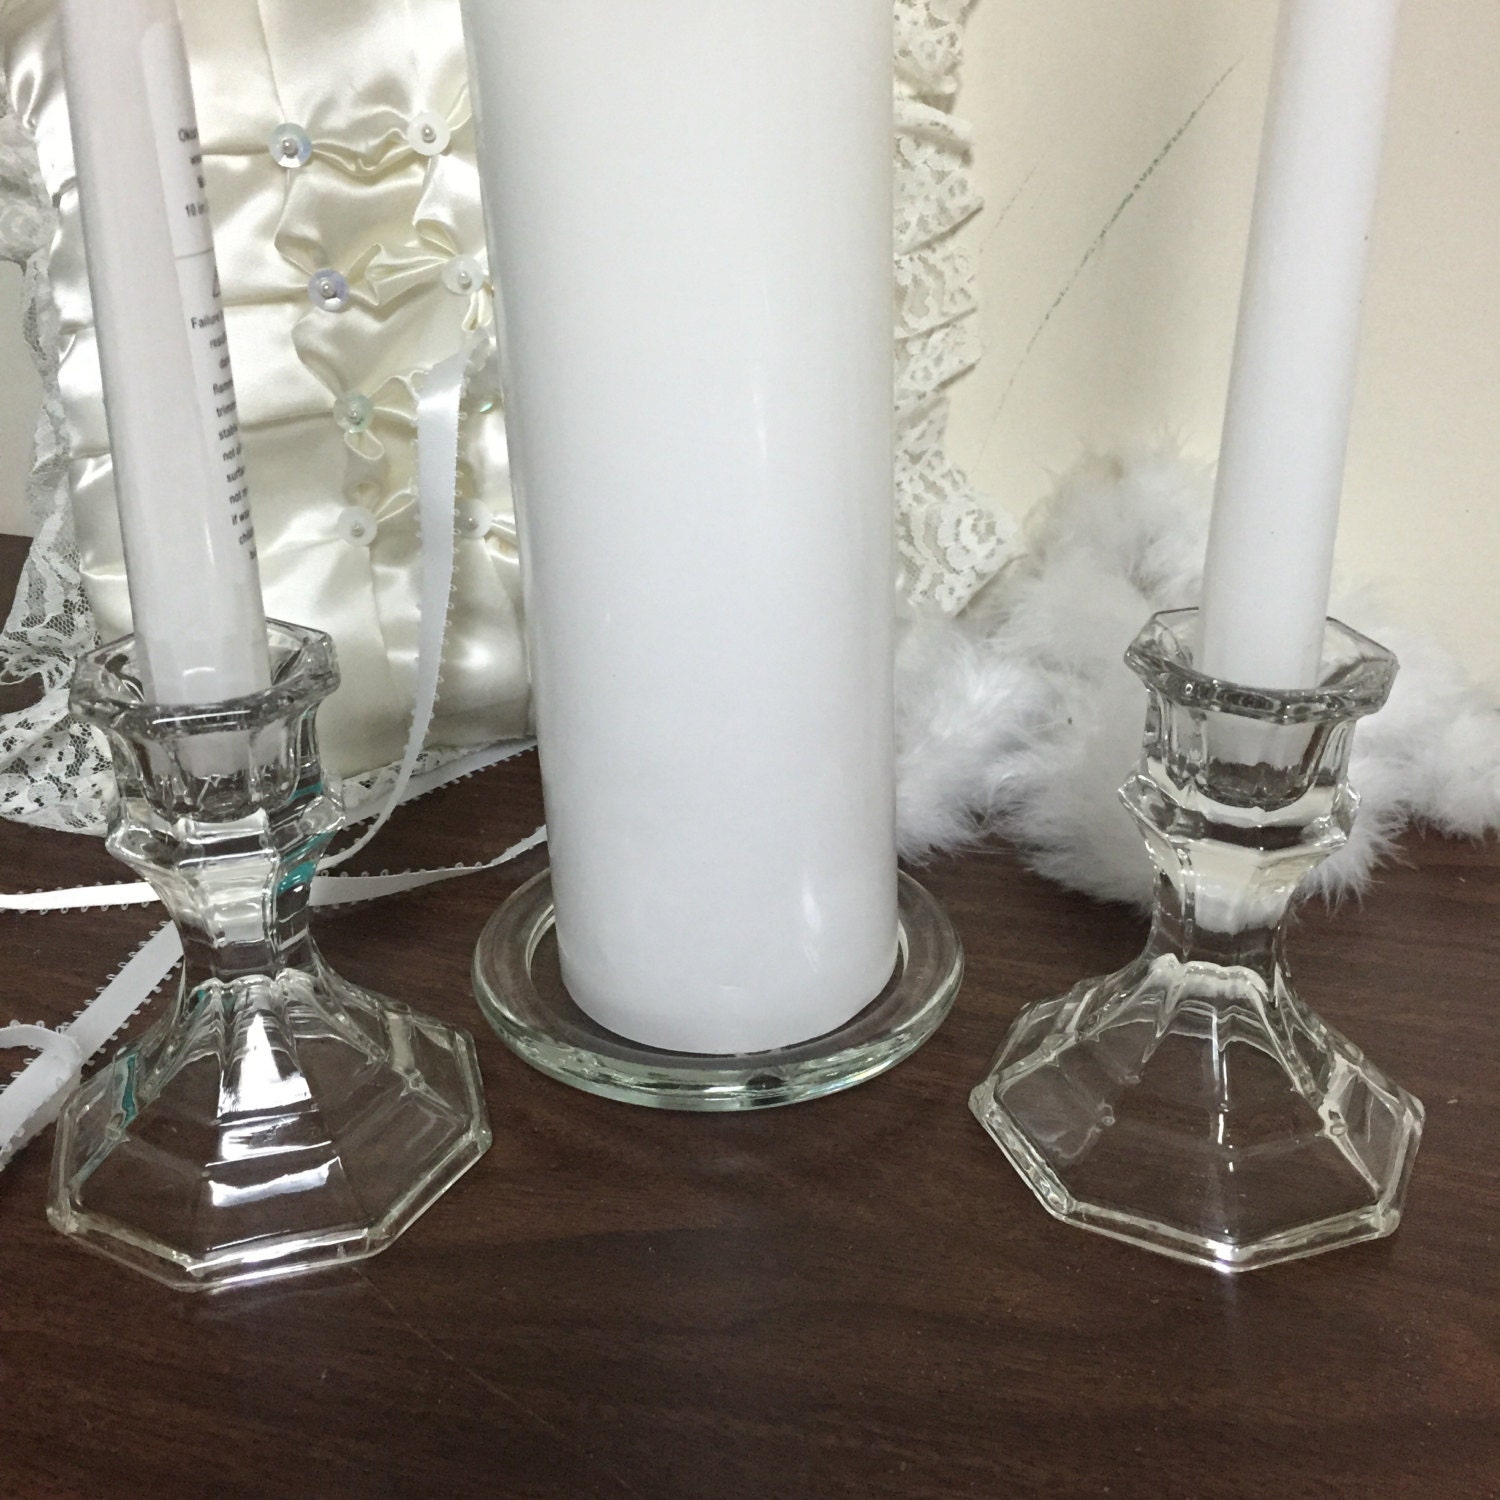 White & crystal CARVED Wedding Unity Candle SET SALE! 